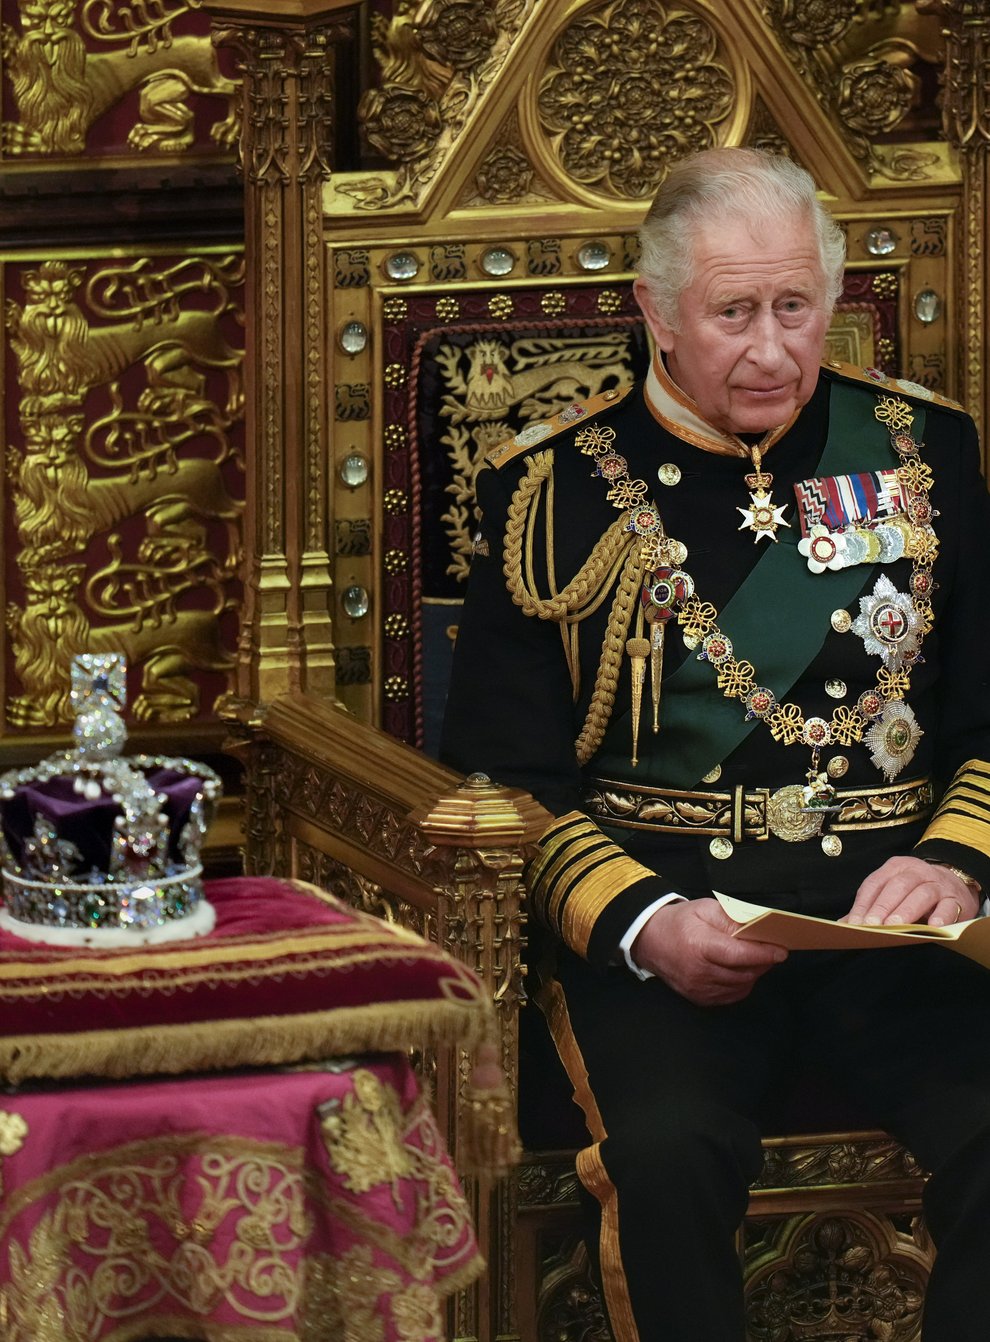 The Prince of Wales delivers the Queen’s Speech during the State Opening of Parliament in the House of Lords, London (Alastair Grant/PA)